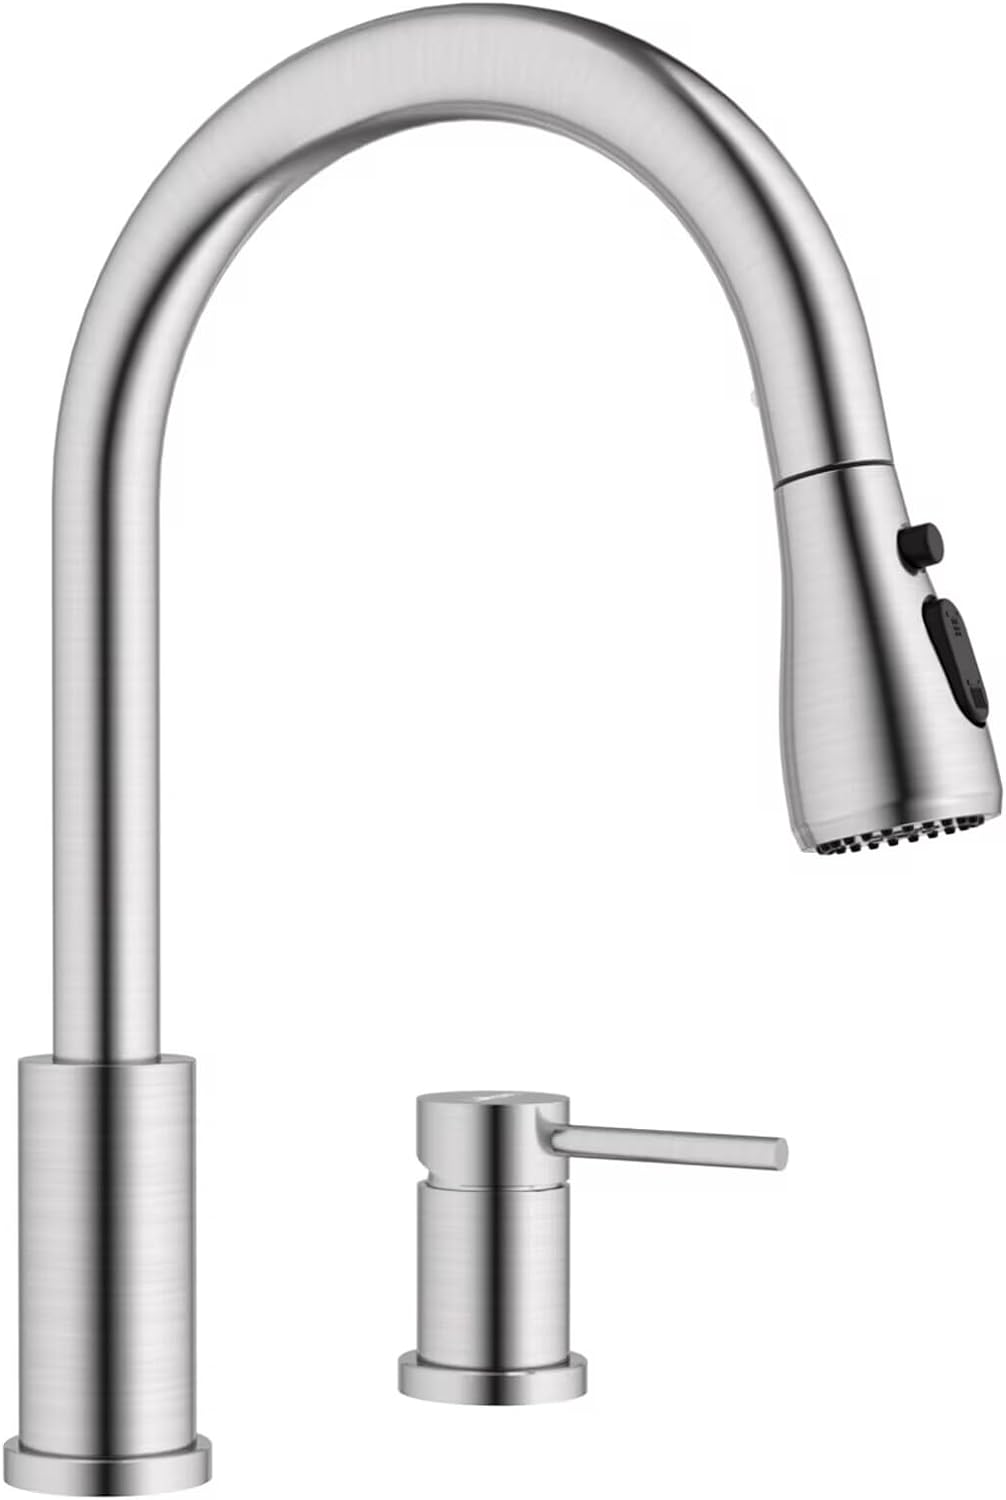 APPASO 2 Hole Kitchen Faucet, Stainless Steel Kitchen Faucet with Pull Down Sprayer 3 Modes, Brushed Nickel High Arch Modern Kitchen Sink Faucet with Side Single Handle 2 Pieces